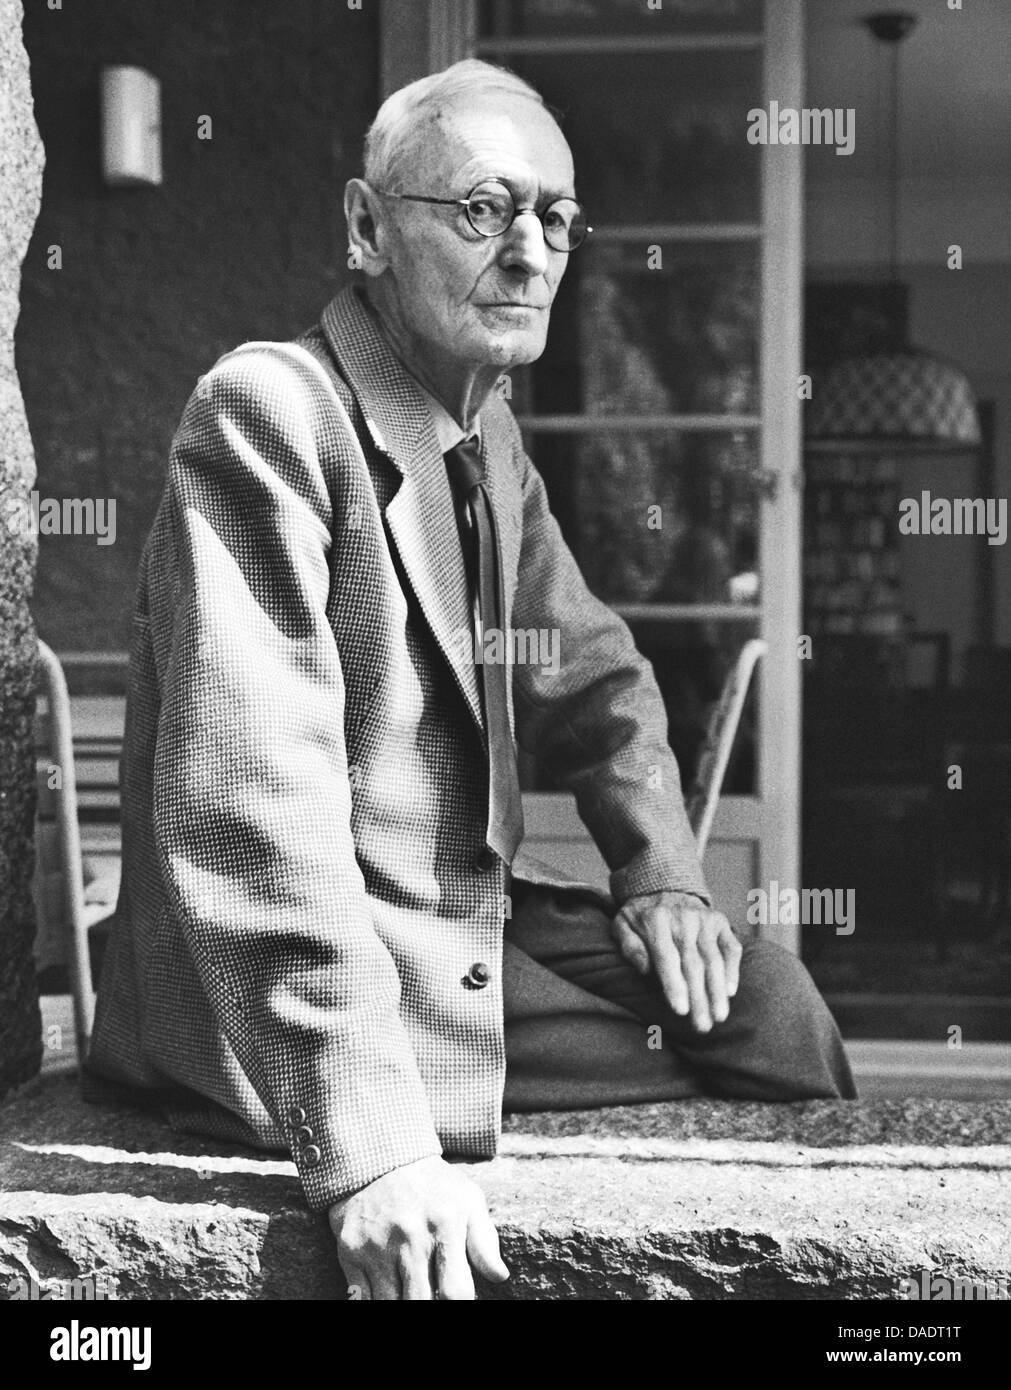 Author Hermann Hesse in 1961. Portrait by photographer Fred Stein (1909-1967) who emigrated 1933 from Nazi Germany to France and finally to the USA. Stock Photo